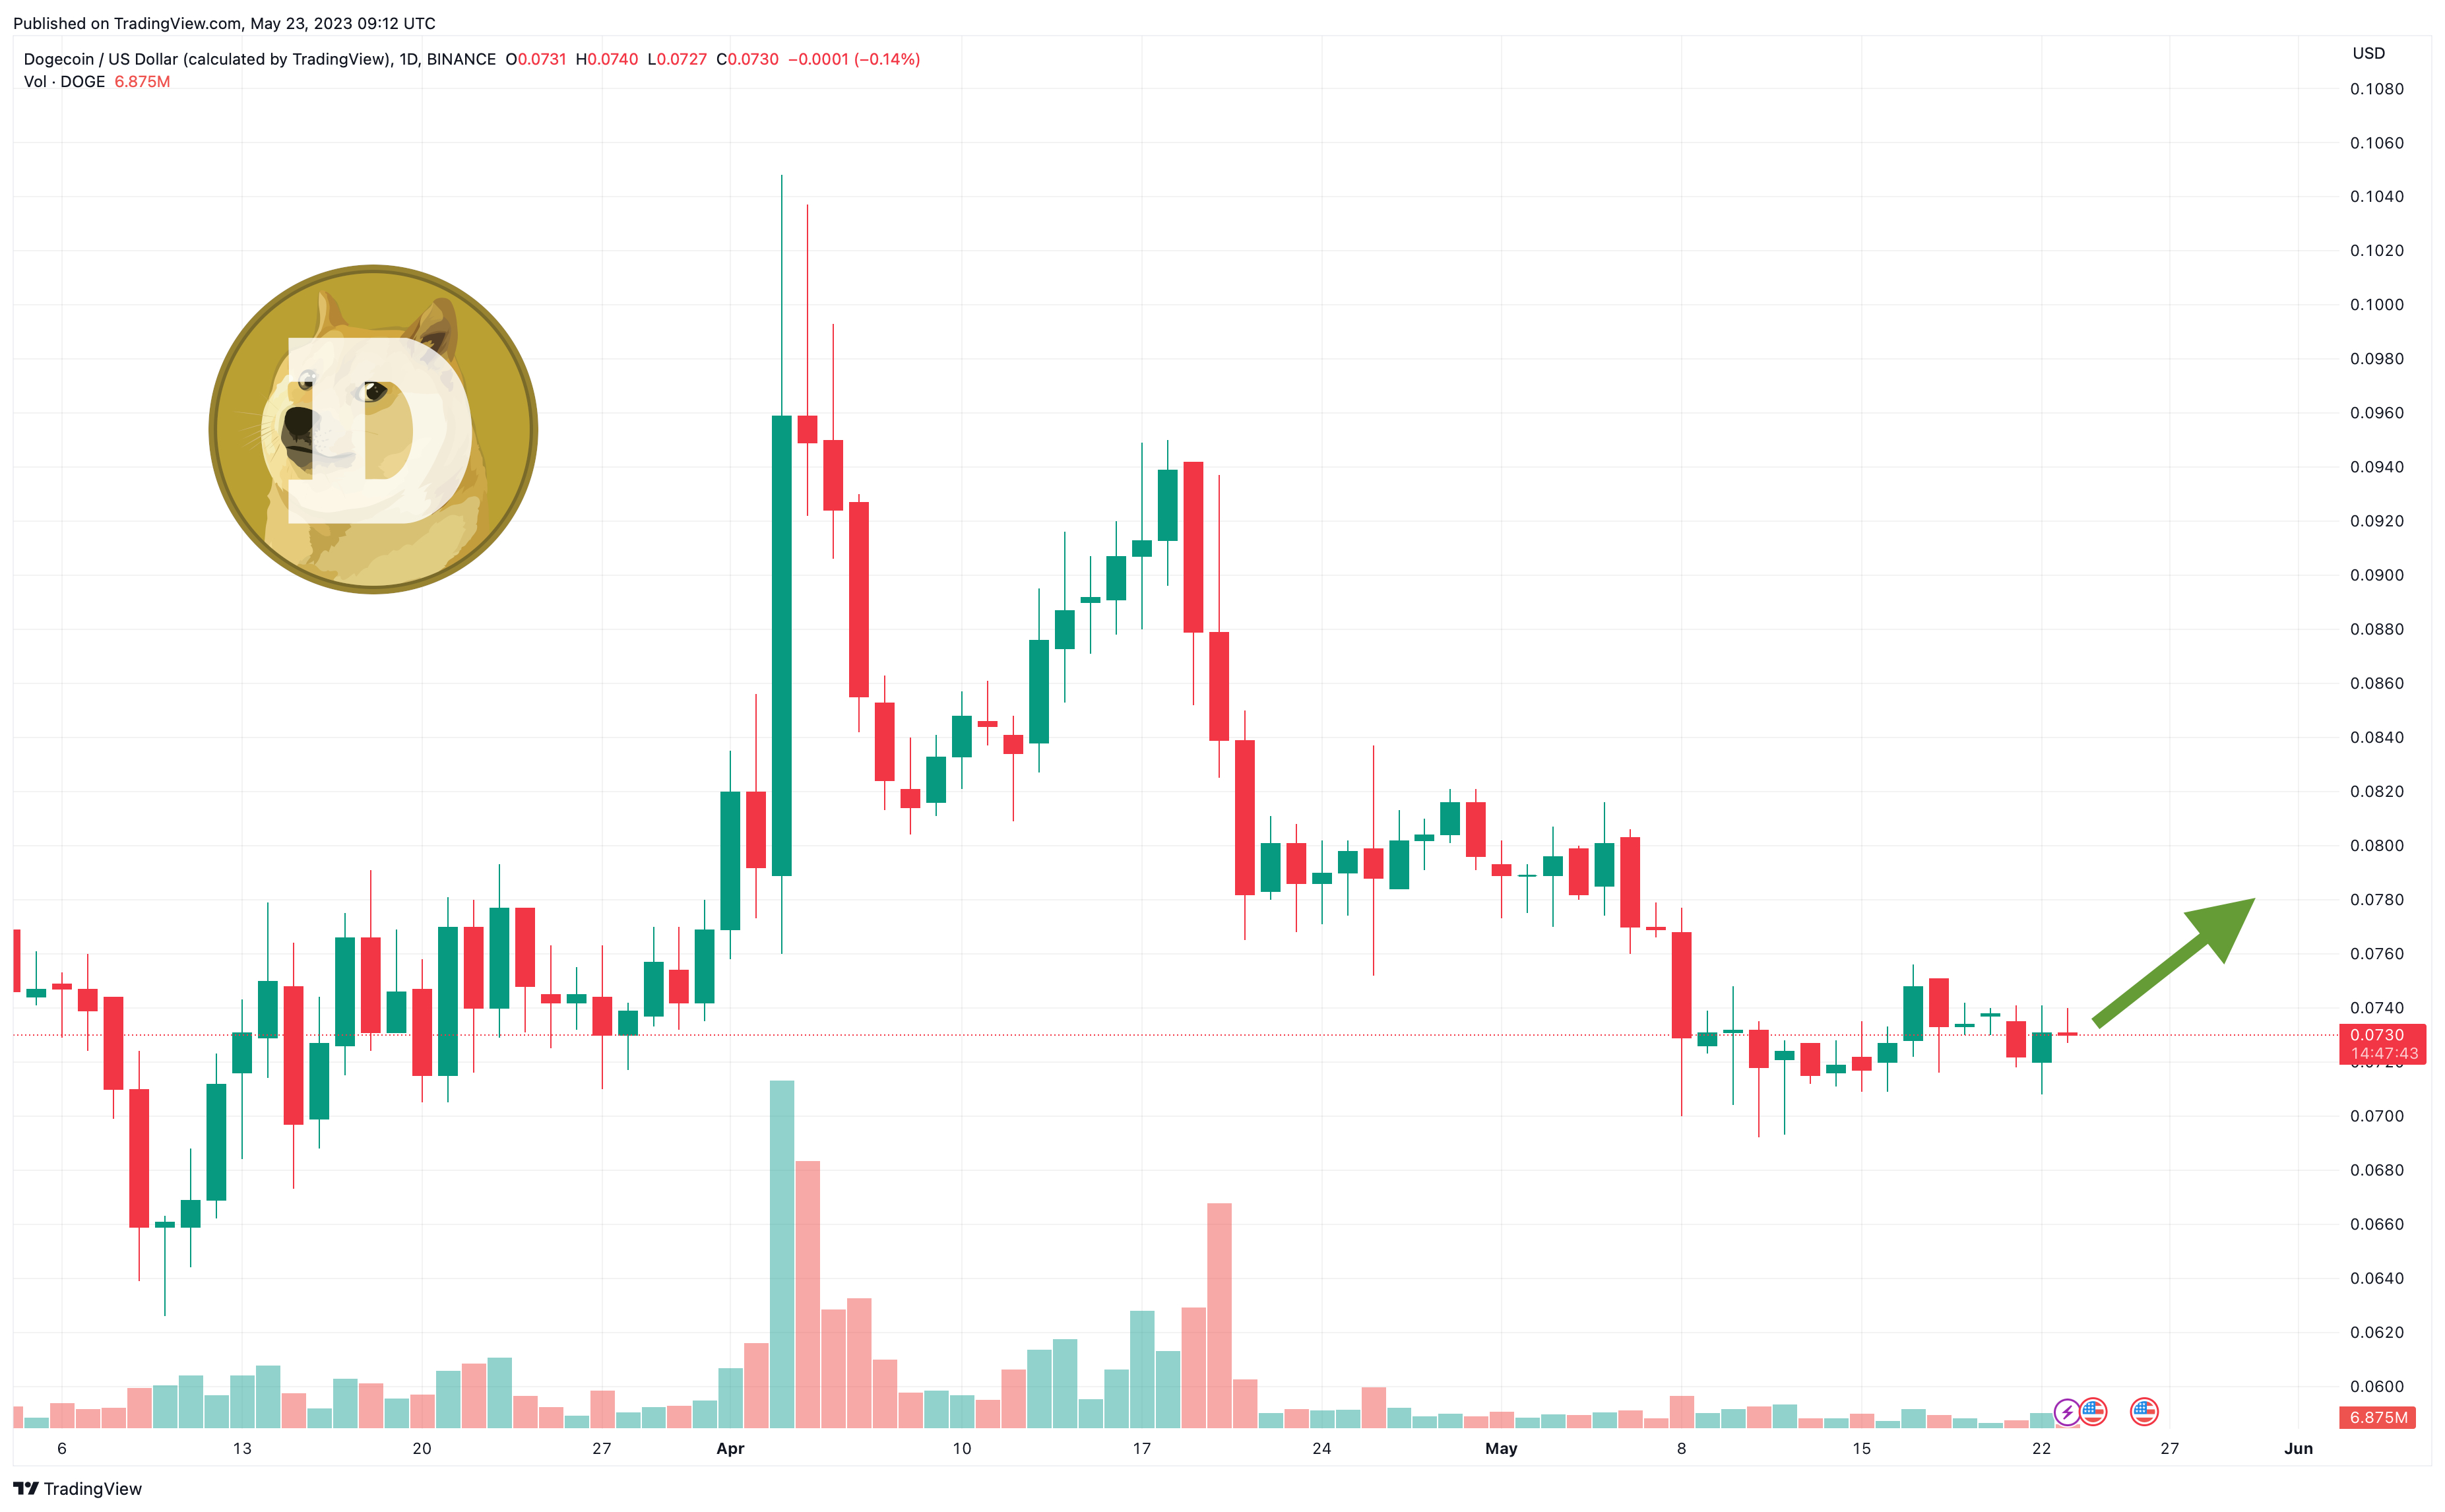 Dogecoin Trading Volume Hits $200 Million: Price Prediction - Is it the Right Time to Buy DOGE?